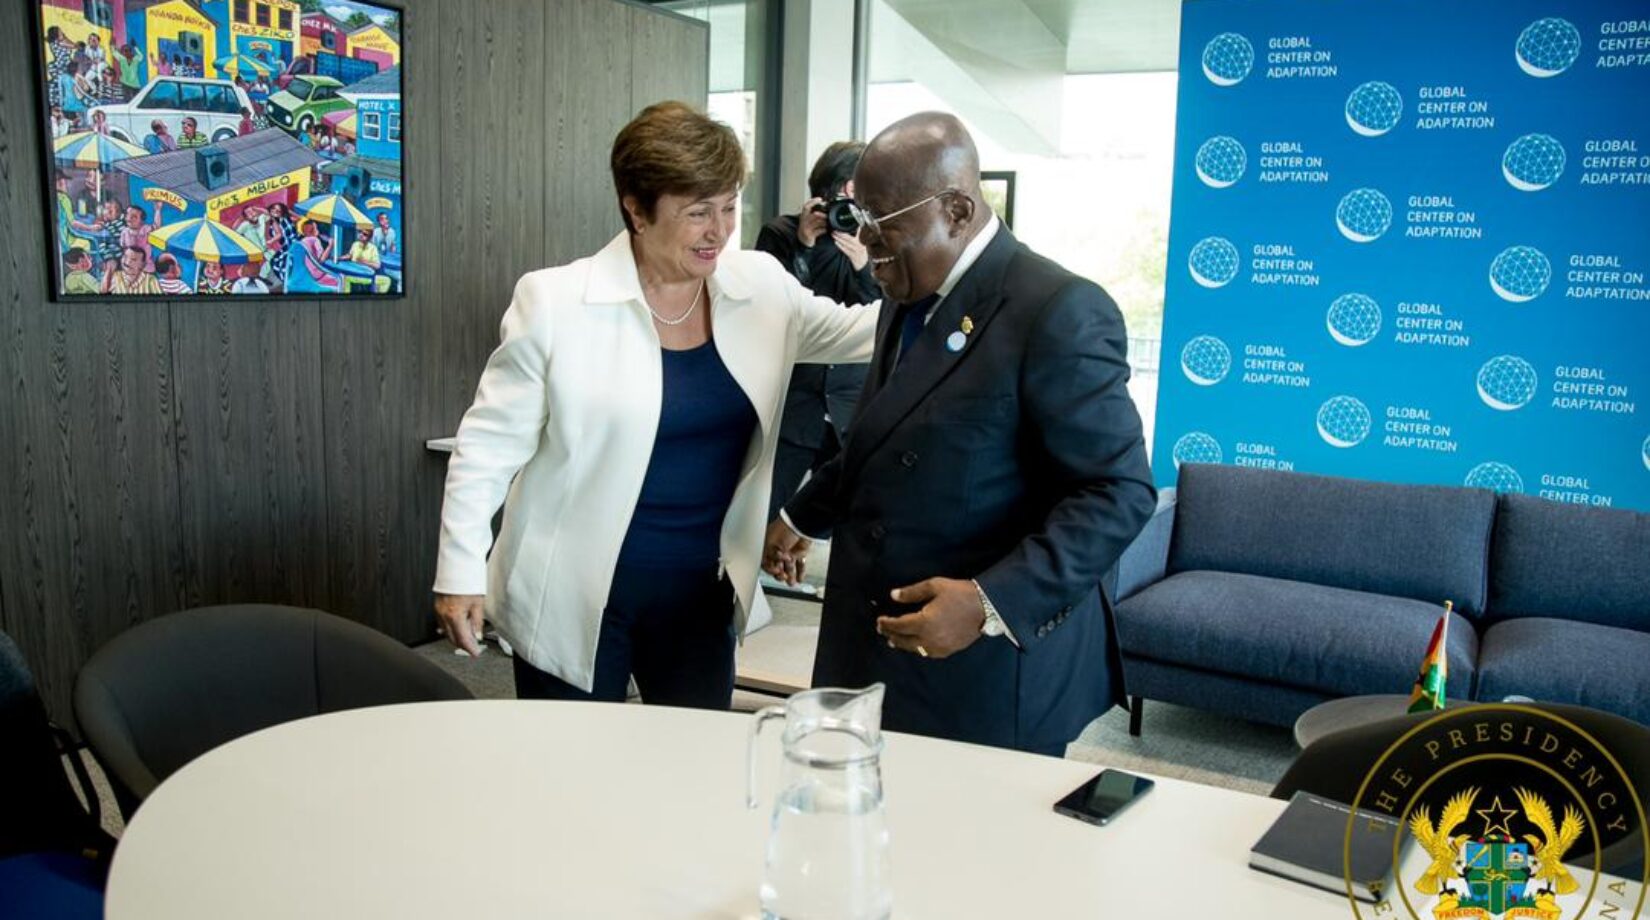 GHANA-IMF $3BN DEAL TO BE FINALISED BEFORE END OF YEAR – IMF BOSS